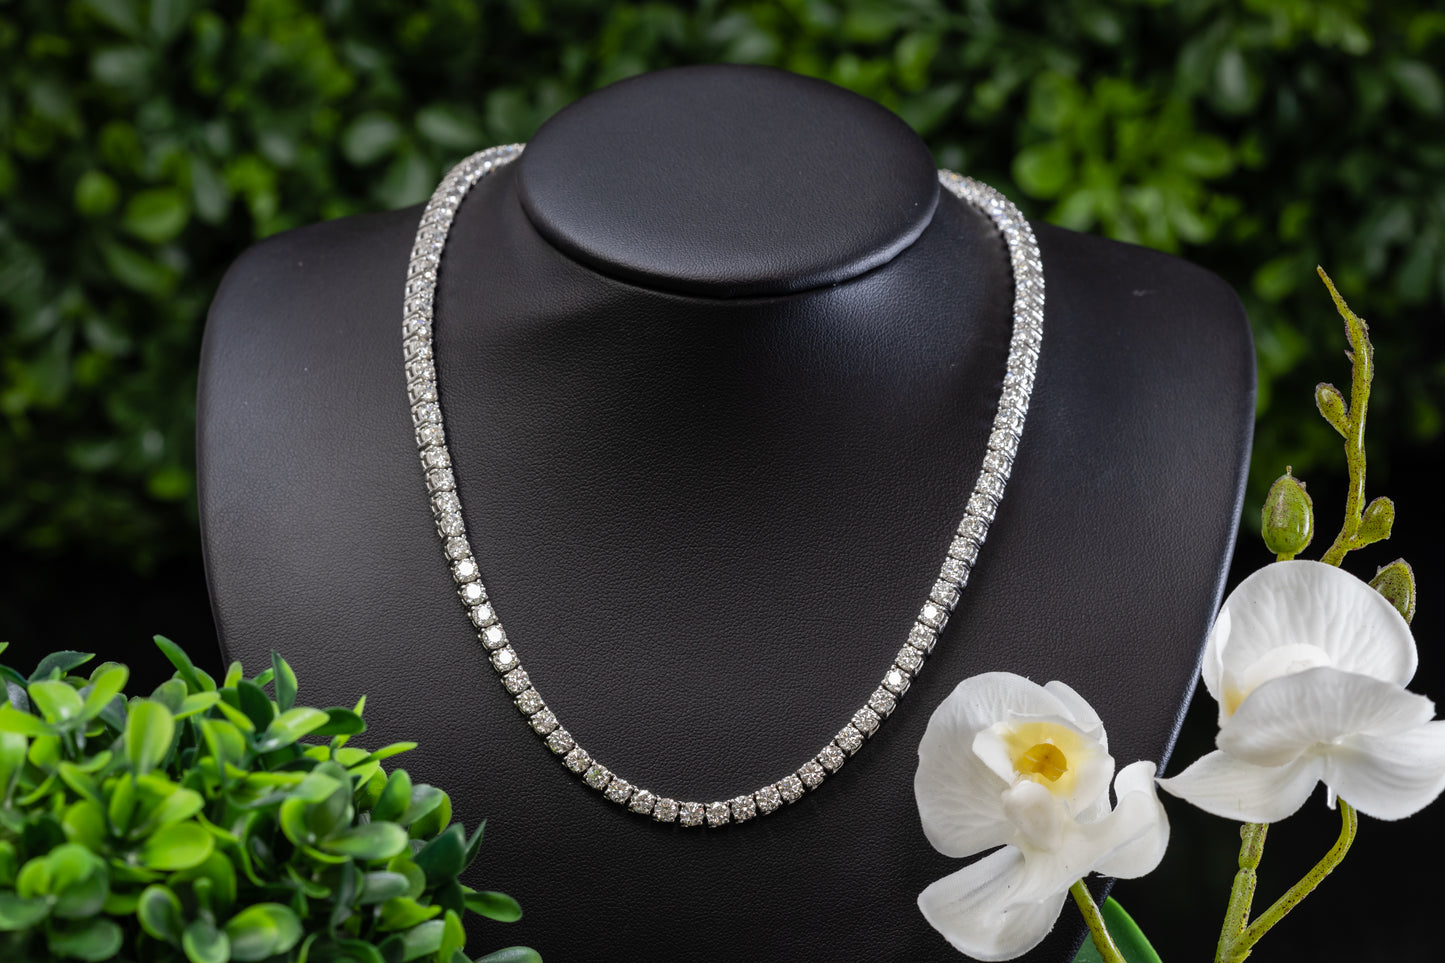 Load image into Gallery viewer, S.KASHI 14k White Gold Diamond Necklace
